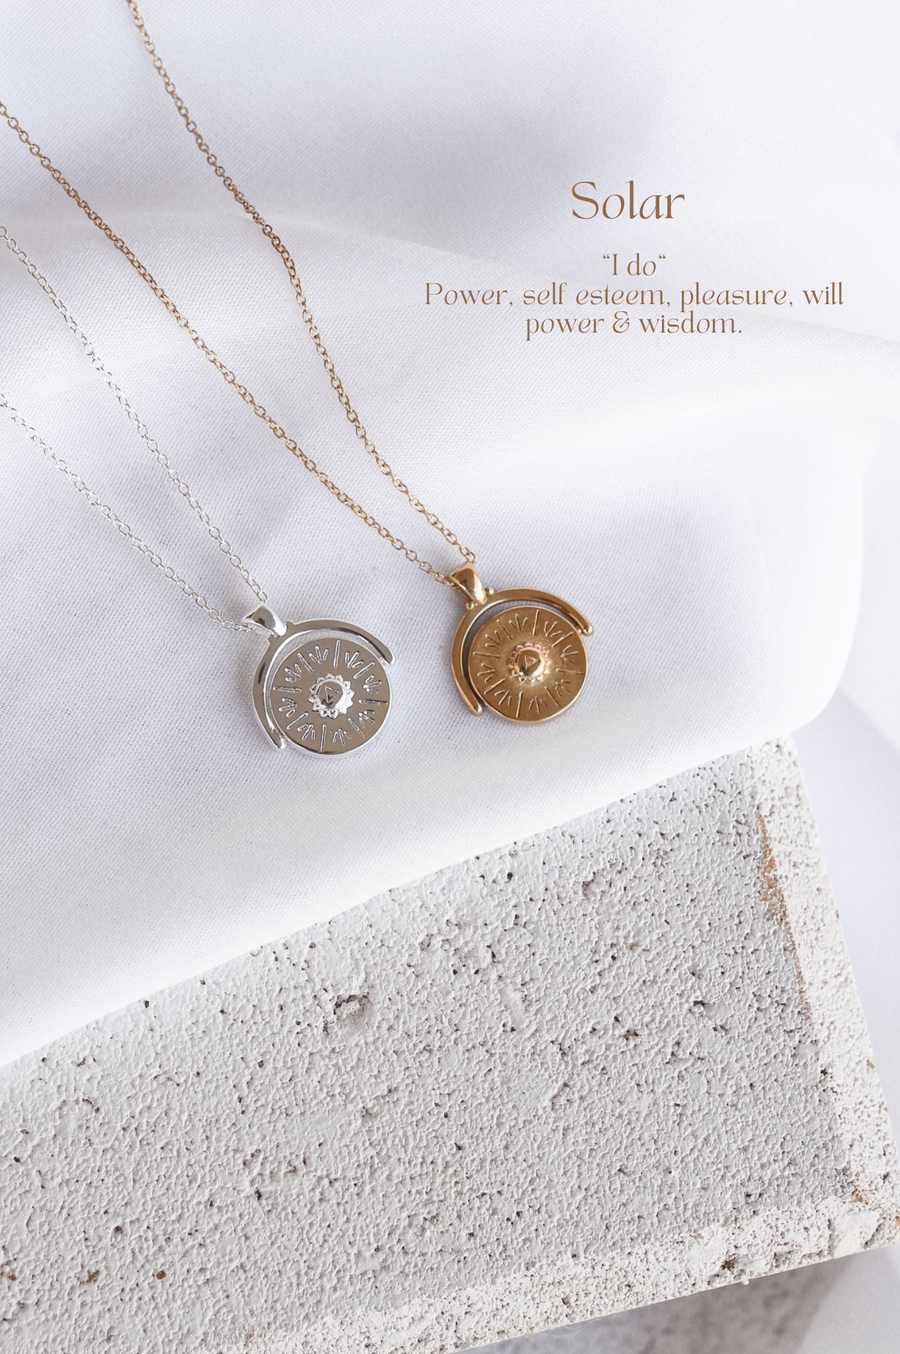 Chakra Necklace - Gold or Silver Plated Stainless Steel